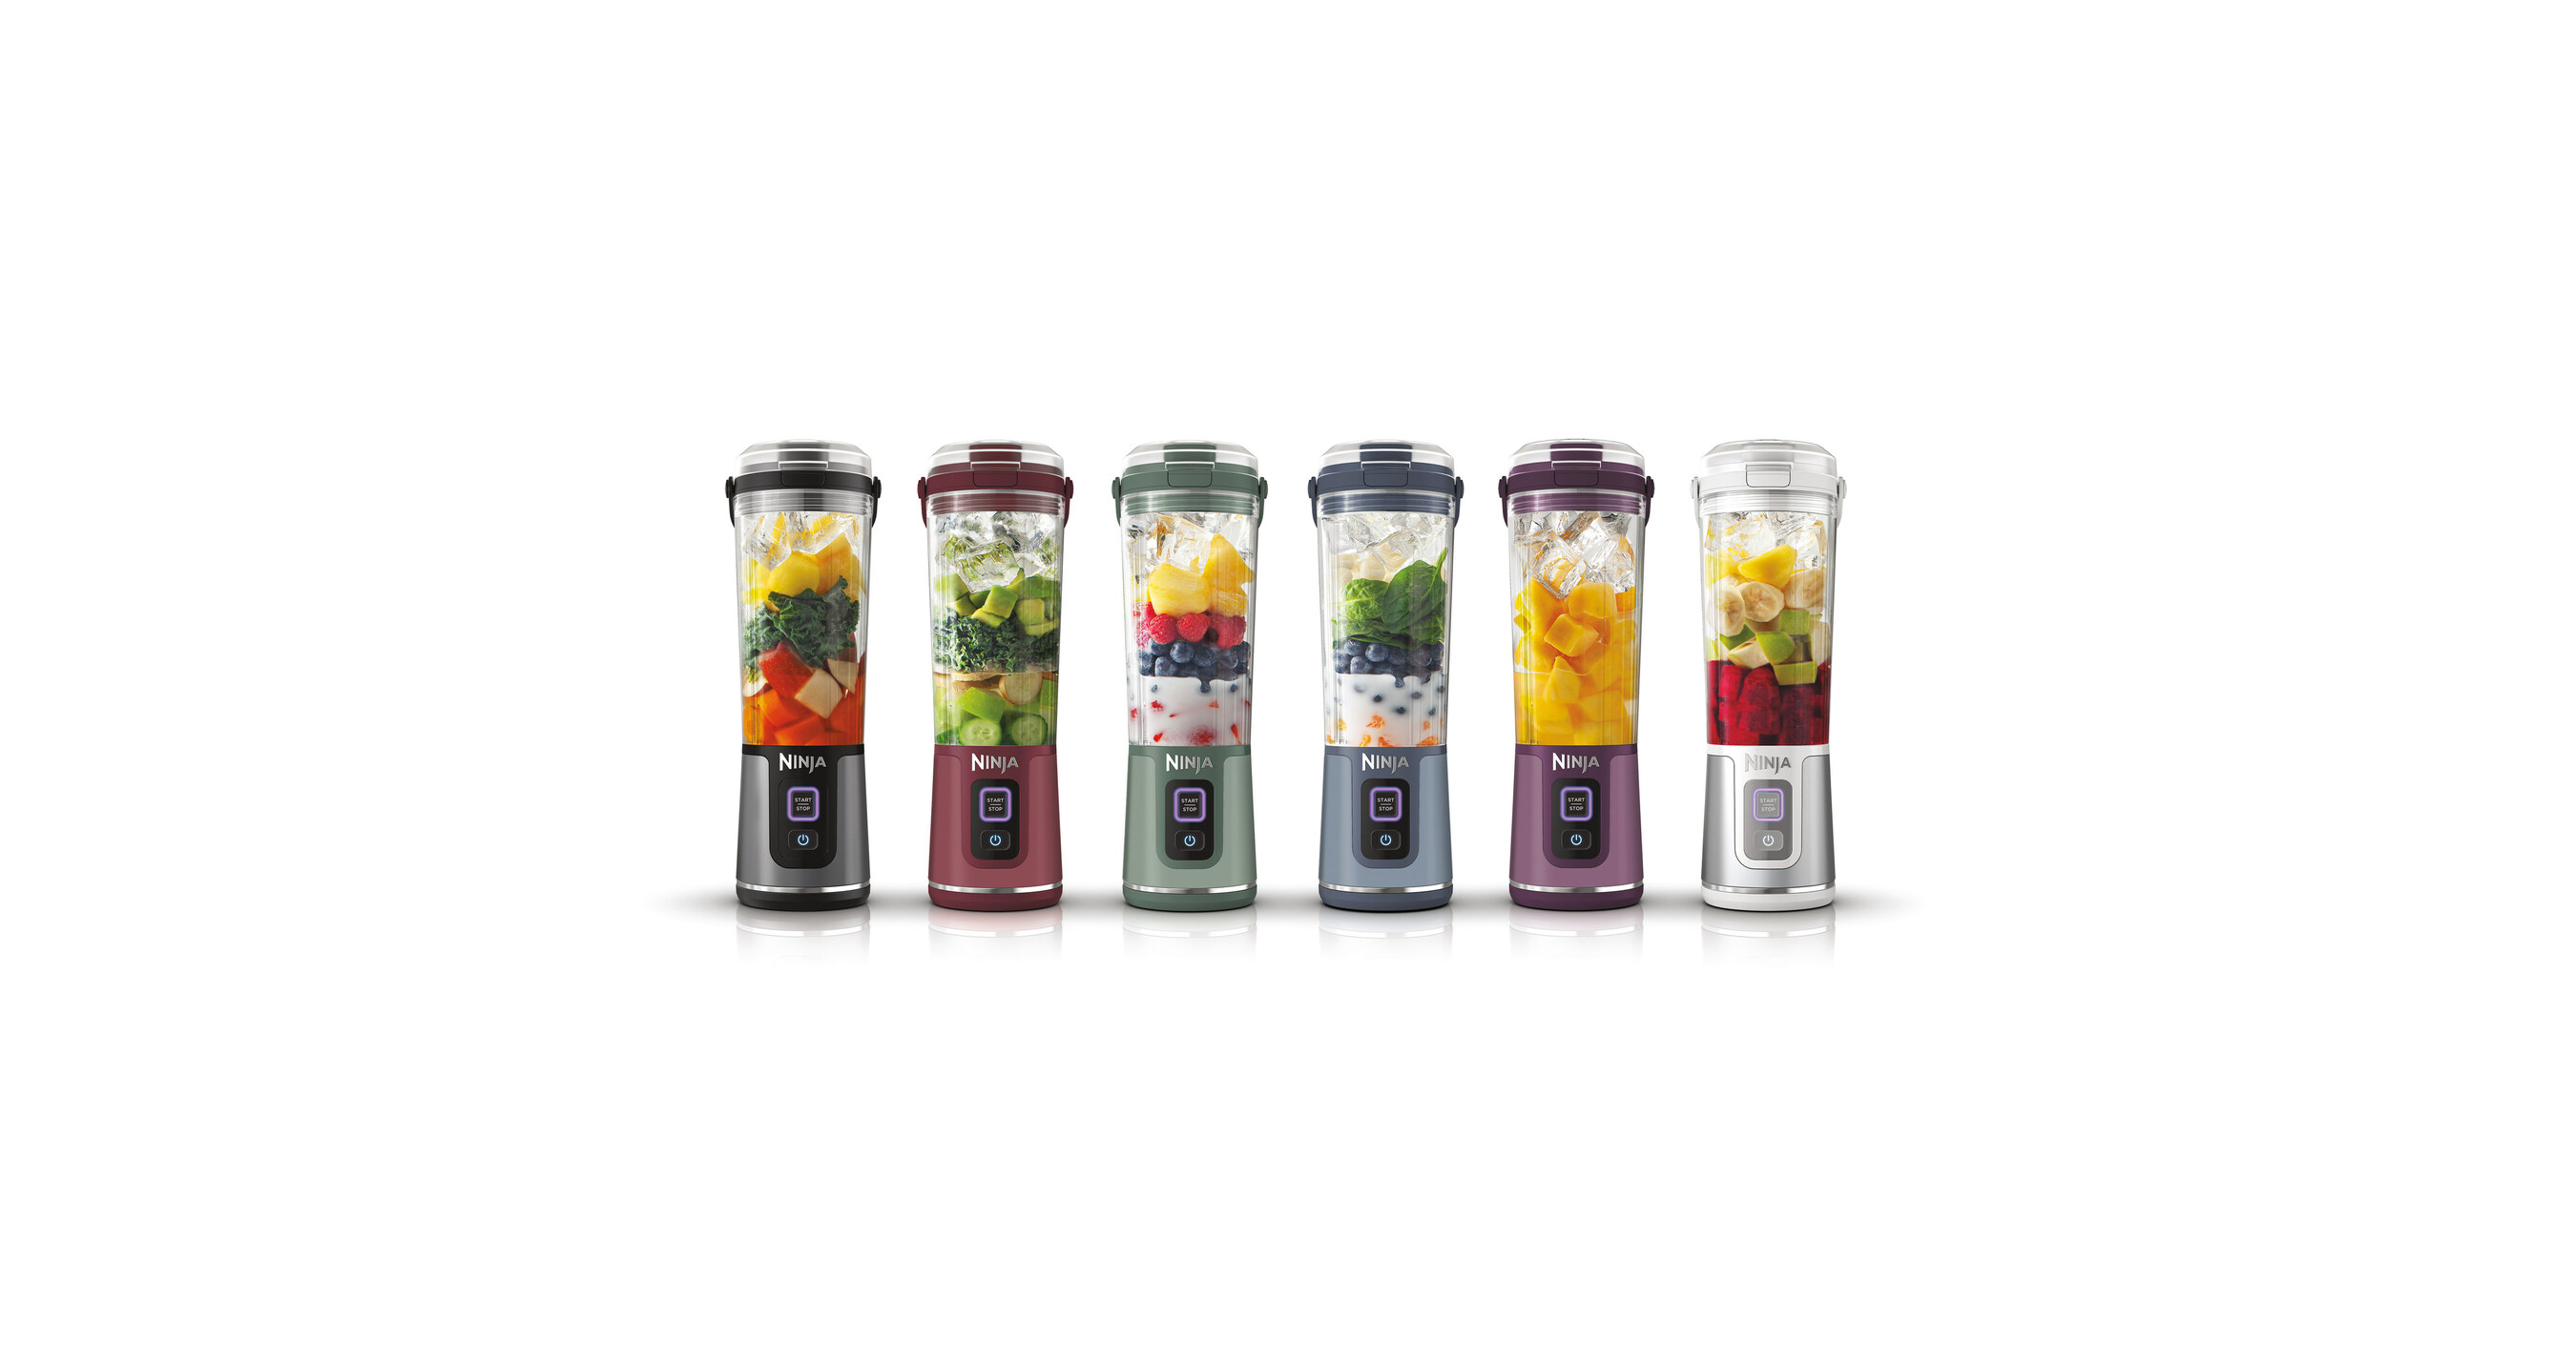 New Ninja Blast™ Portable Blender Challenges the Competition with